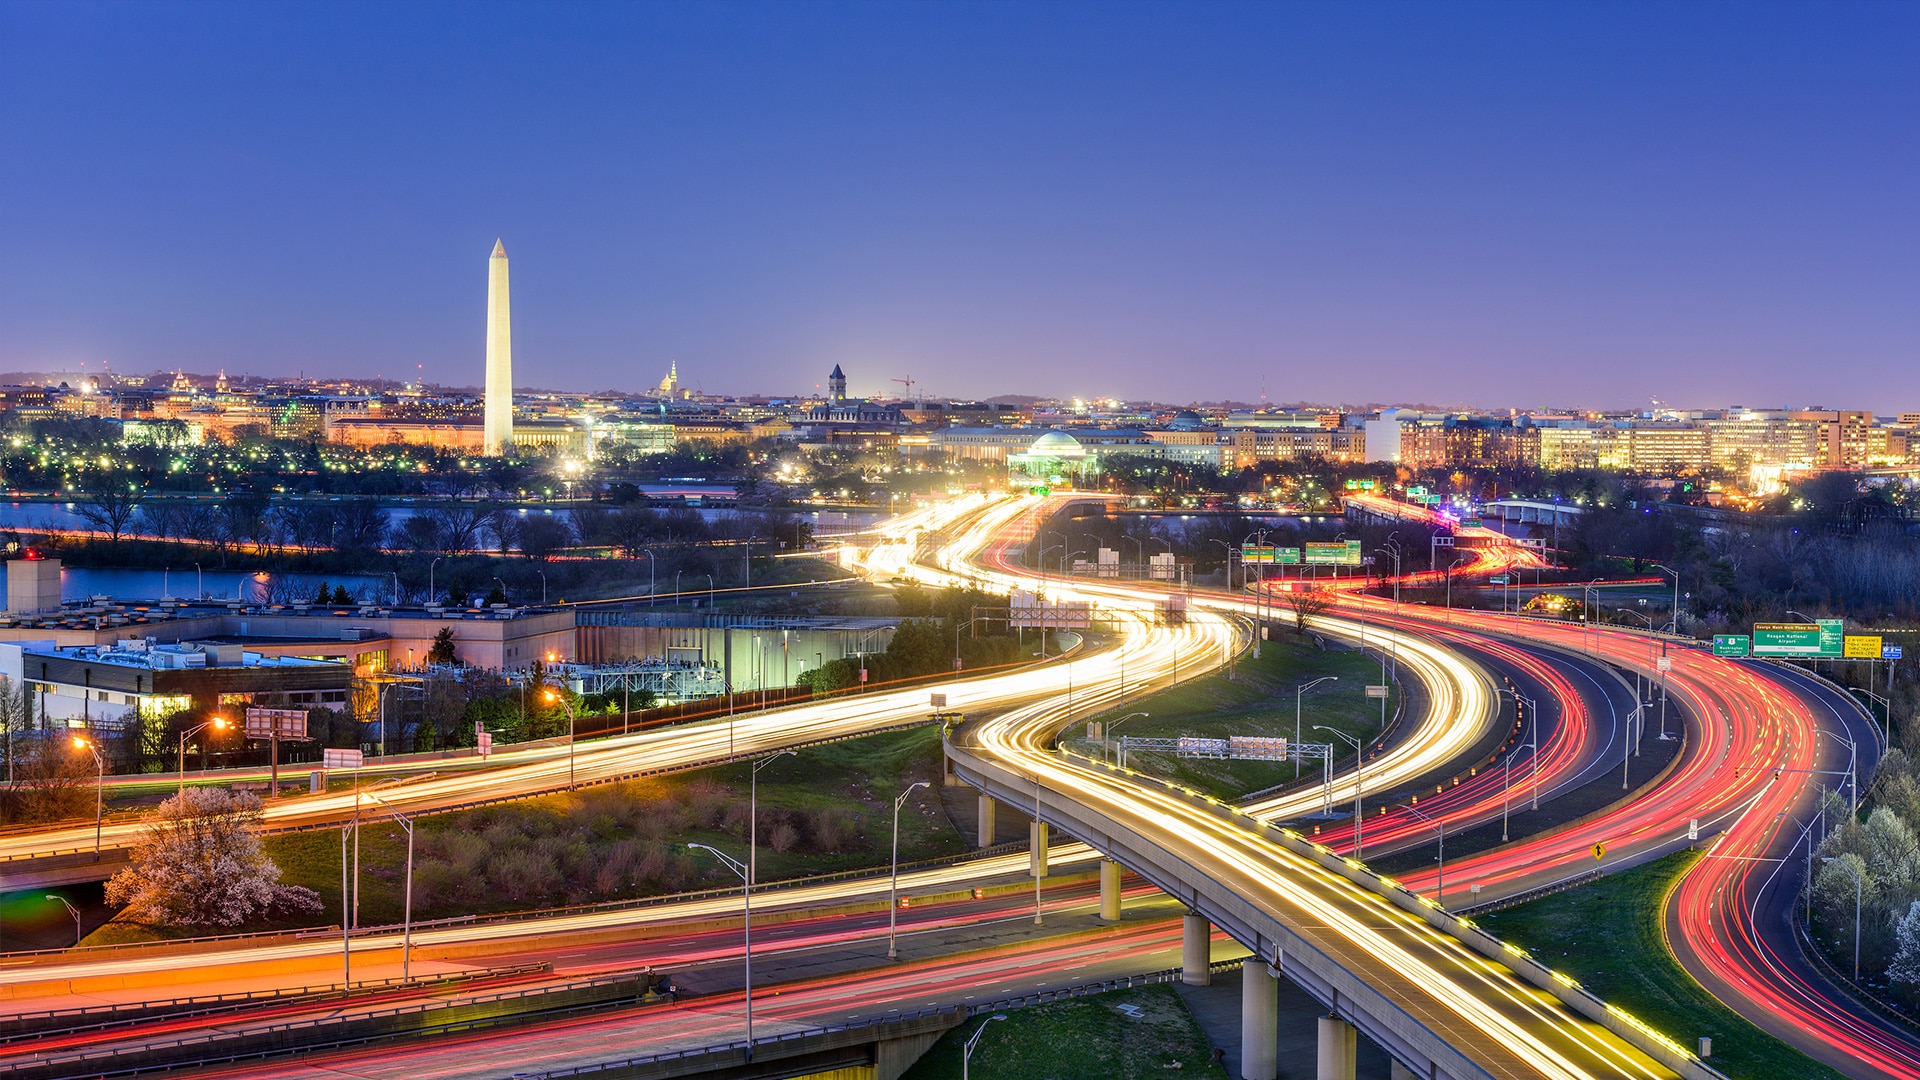 dc highways with washington monument in background - jefferson apartment group